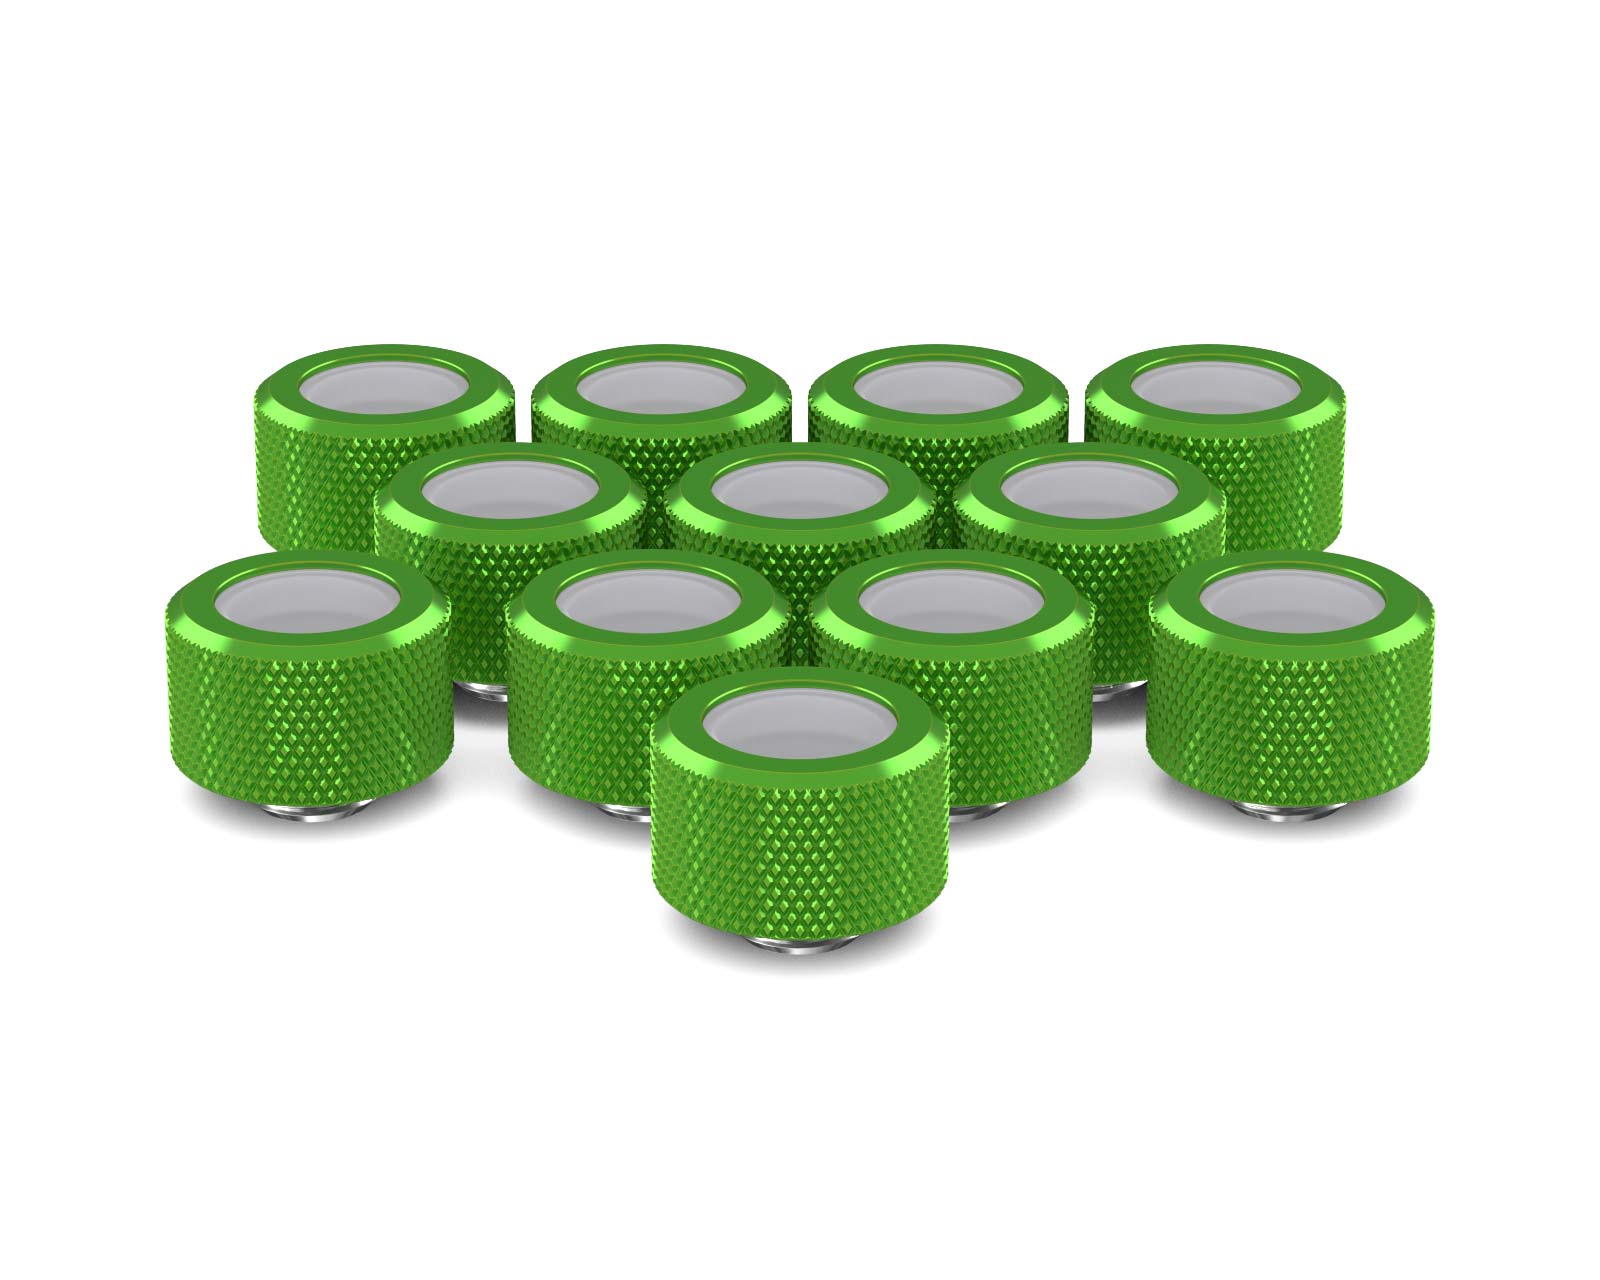 PrimoChill 16mm OD Rigid SX Fitting - 12 Pack - PrimoChill - KEEPING IT COOL Toxic Candy